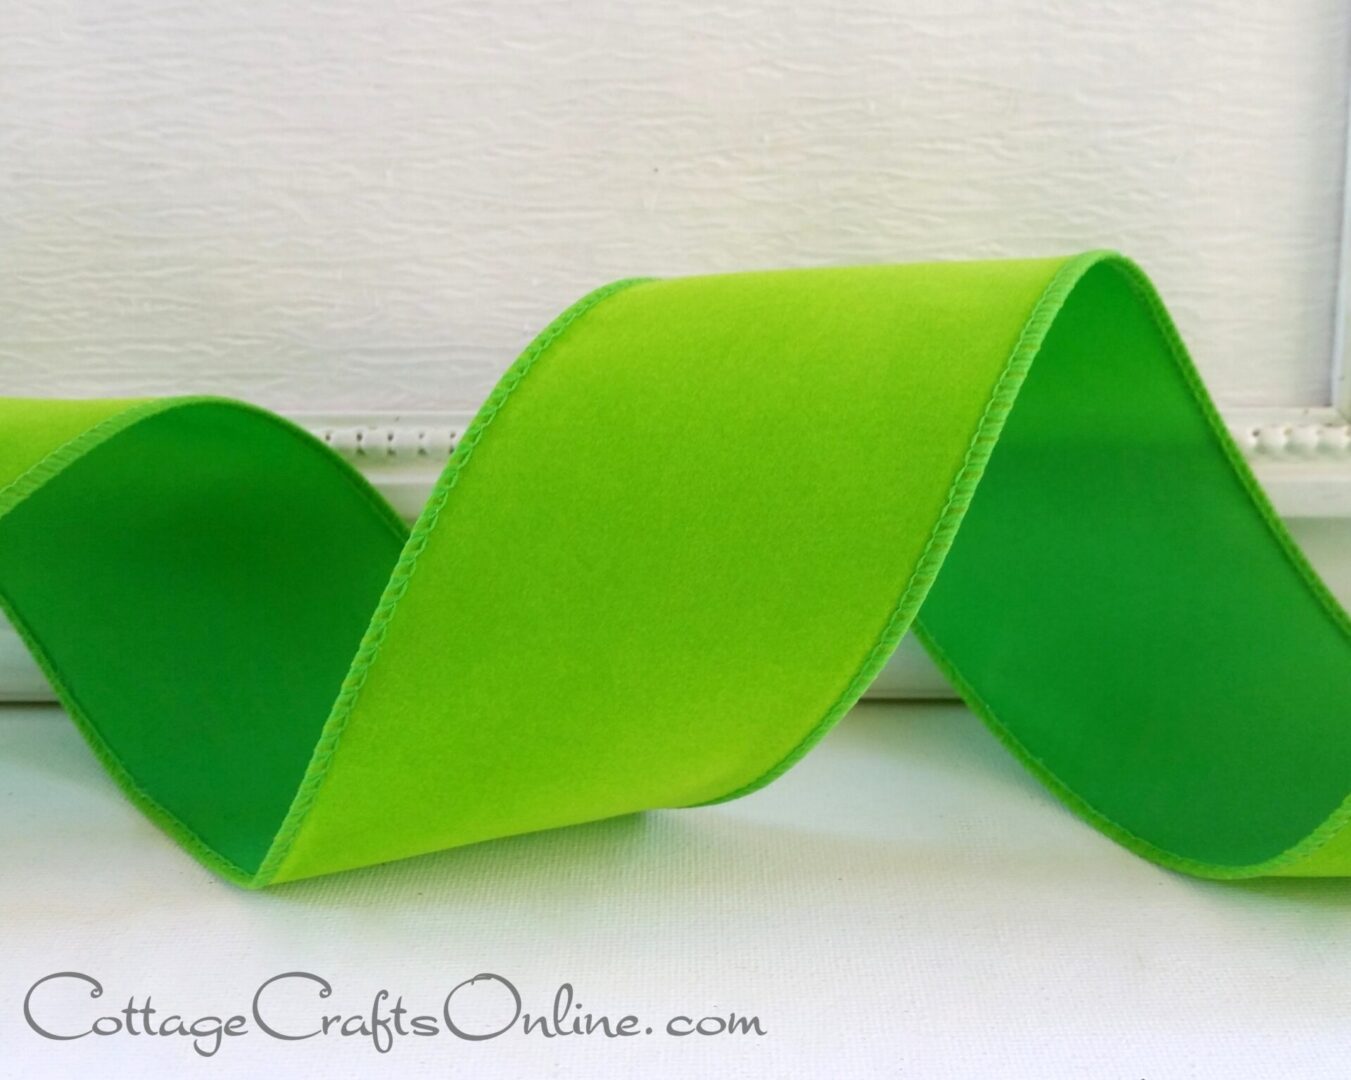 Lime green velvet 2.5" wide wired ribbon from the Etsy shop of Cottage Crafts Online.